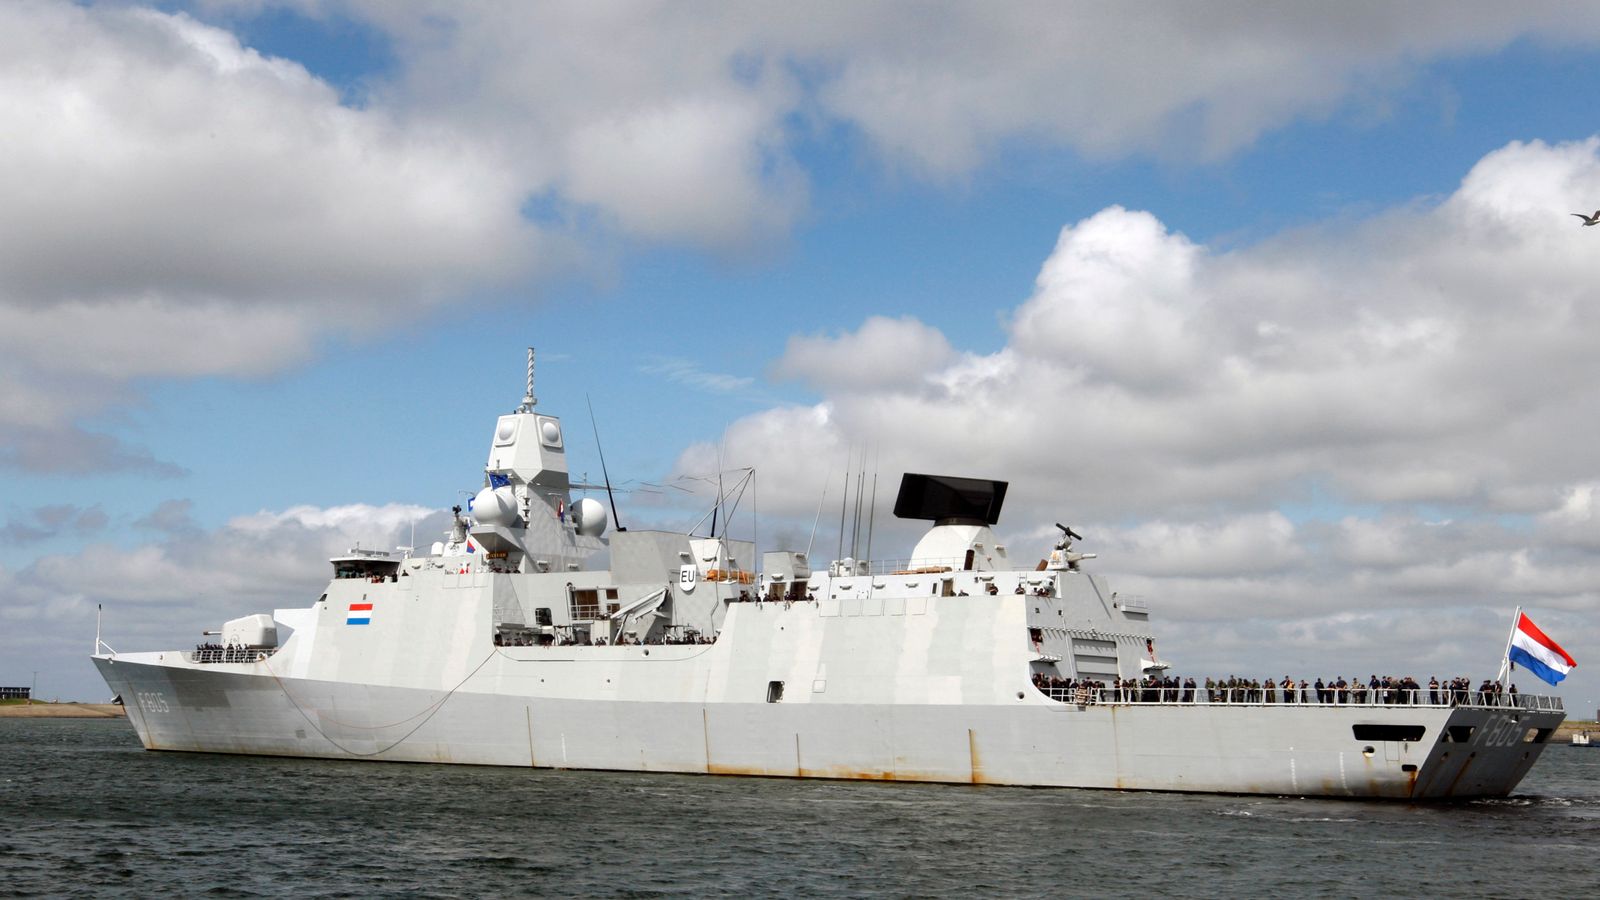 Russia accused of threatening Dutch warship on patrol with Britain’s HMS Defender